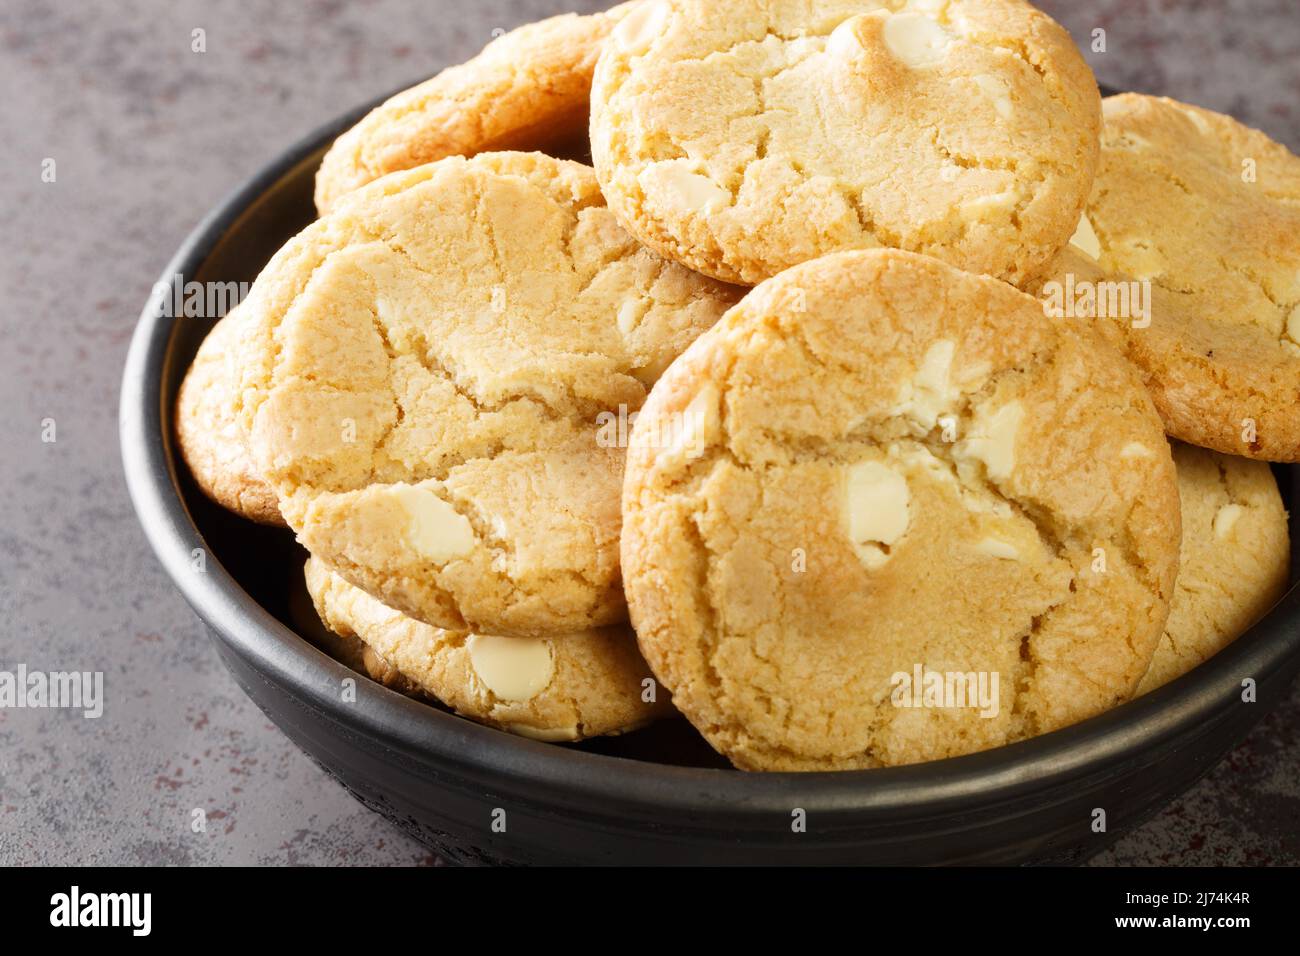 White chocolate biscuit cookies and macadamia nuts in the plate on the table close-up. Horizontal Stock Photo